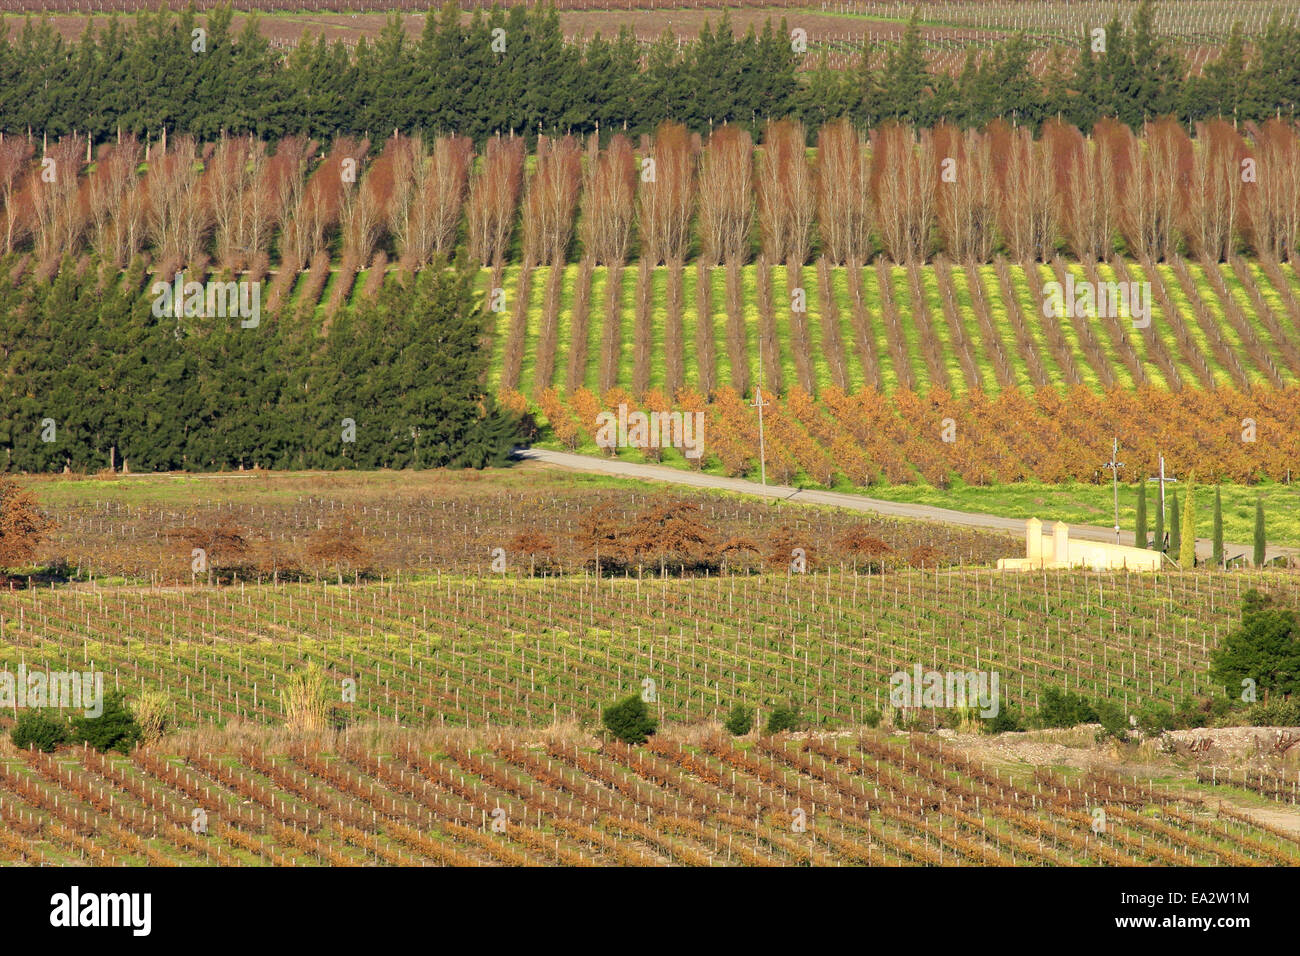 Autumn landscape of vineyards, Western Cape, South Africa Stock Photo